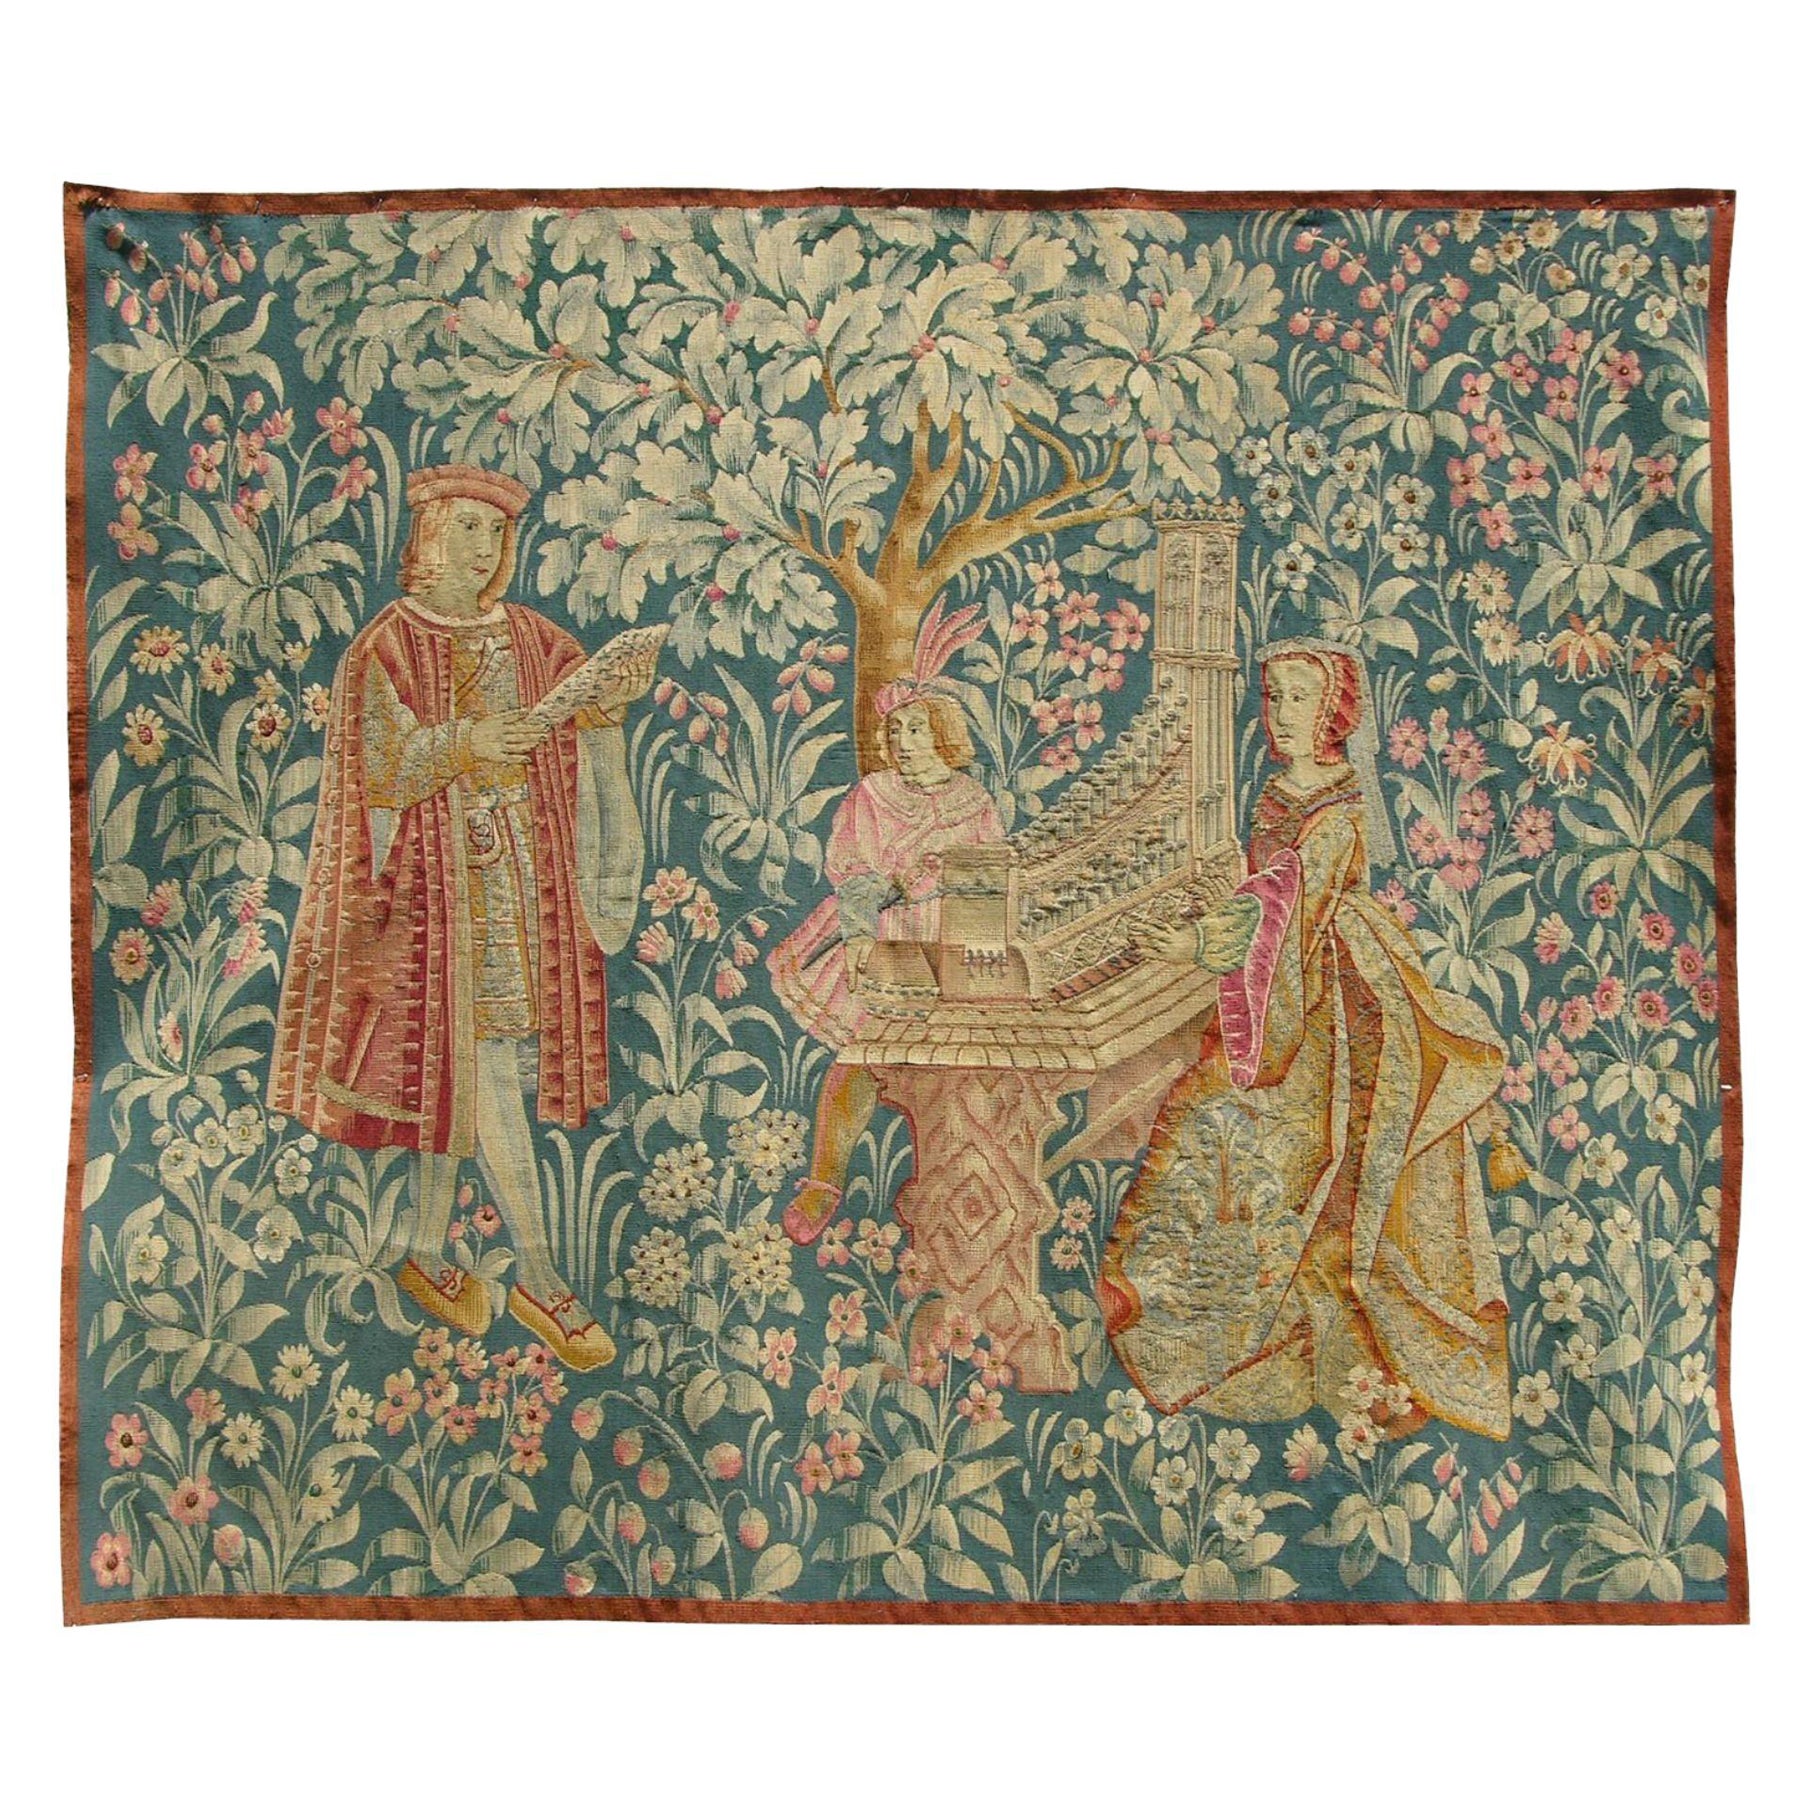 Antique 19th Century Flrmish Tapestry 5'7" X 4'9" For Sale